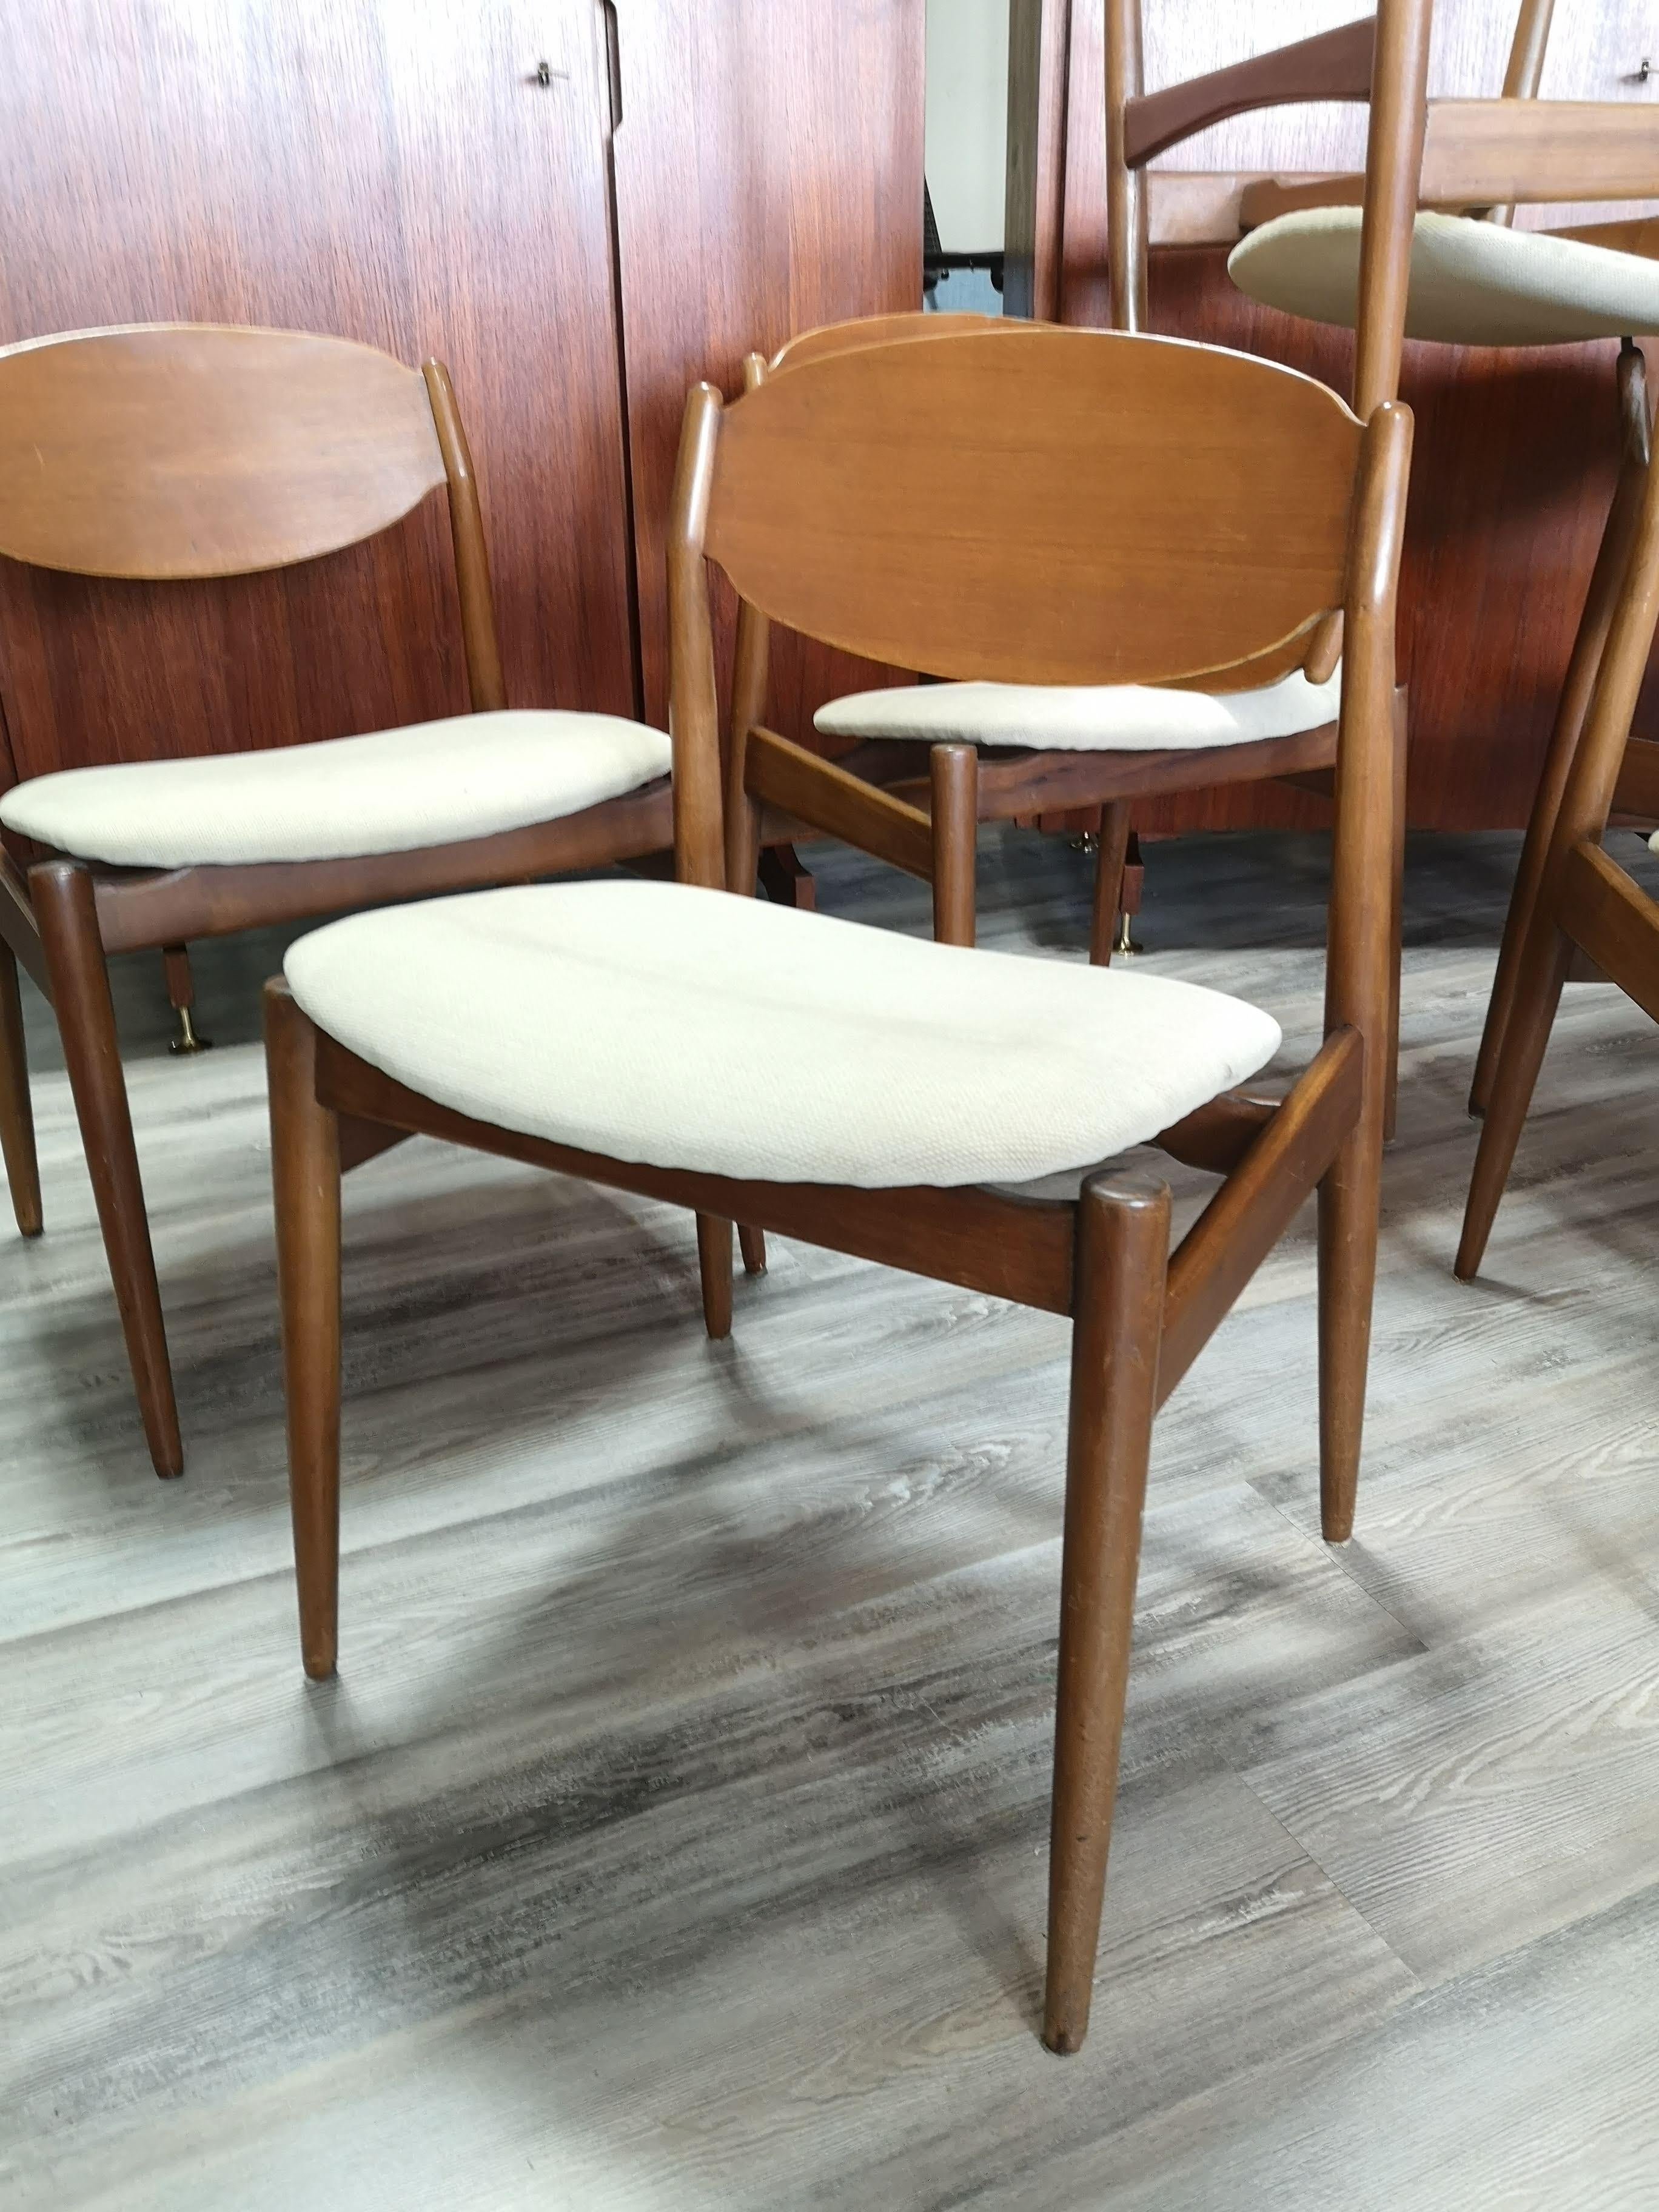 Fabric Set of 6 Chairs by Leonardo Fiori for ISA, Italy, 1960s For Sale